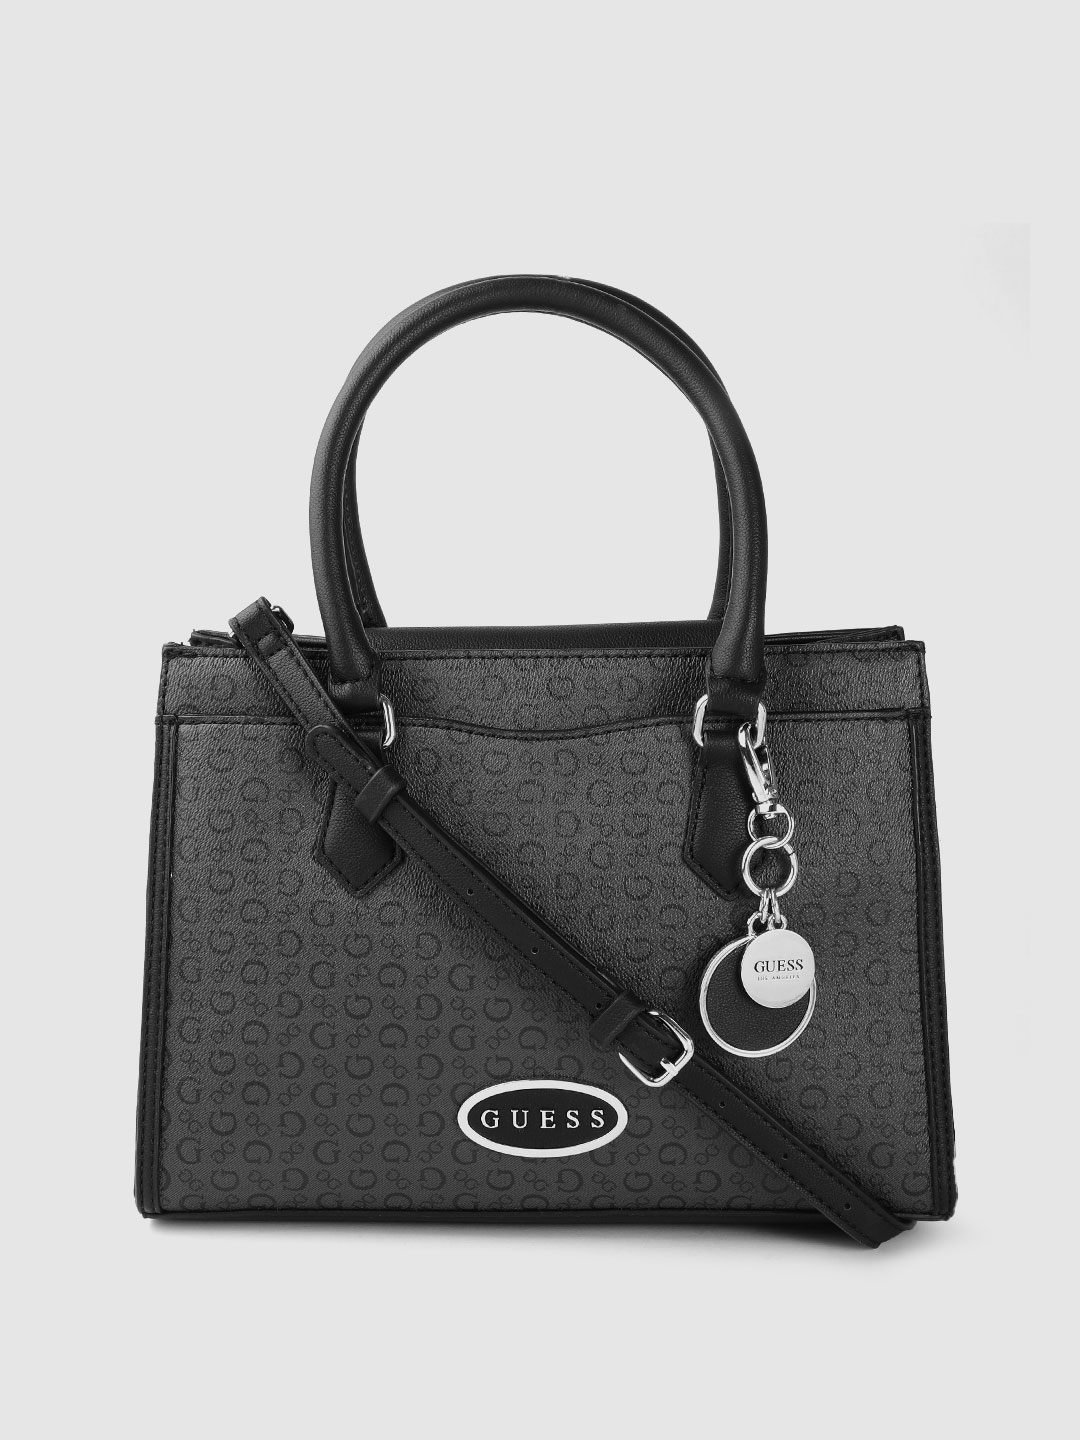 GUESS Charcoal Textured PU Structured Handheld Bag Price in India